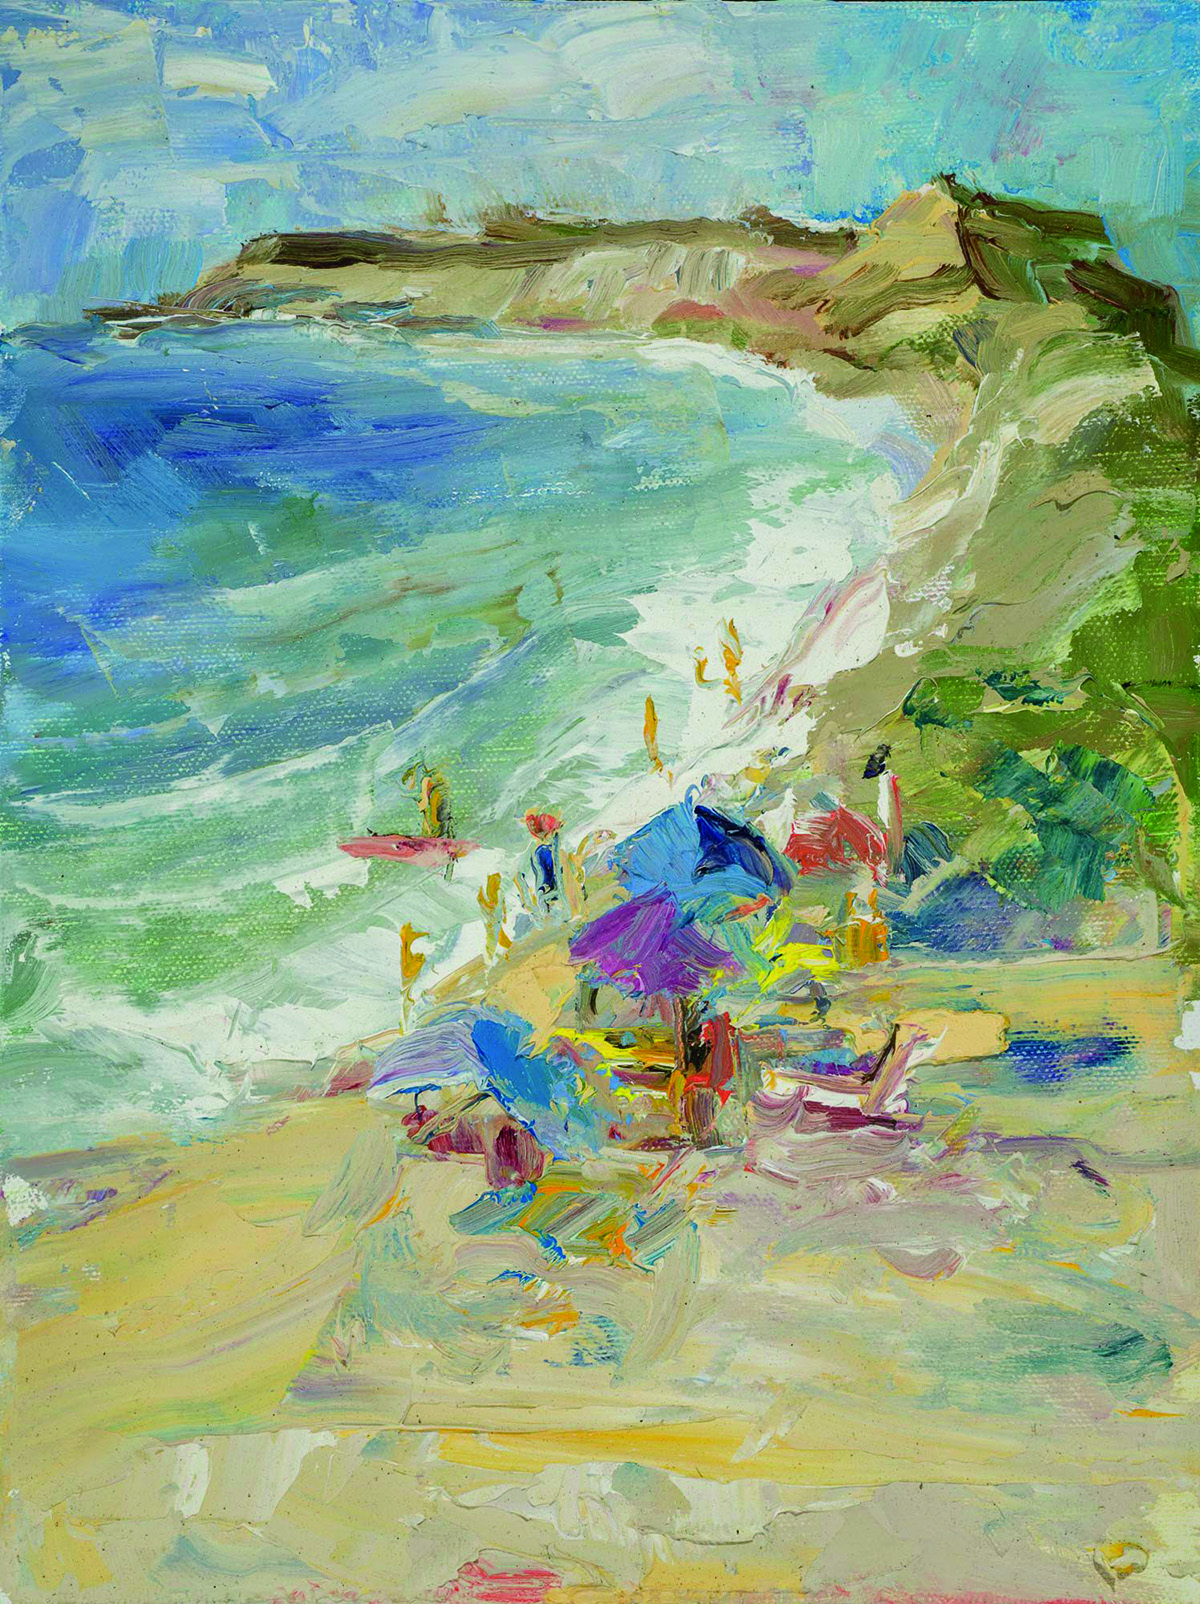 “Crystal Cove Vista” by Laurie Elizabeth McKinley, 2022, Oil on linen, 14 x 10 inches 